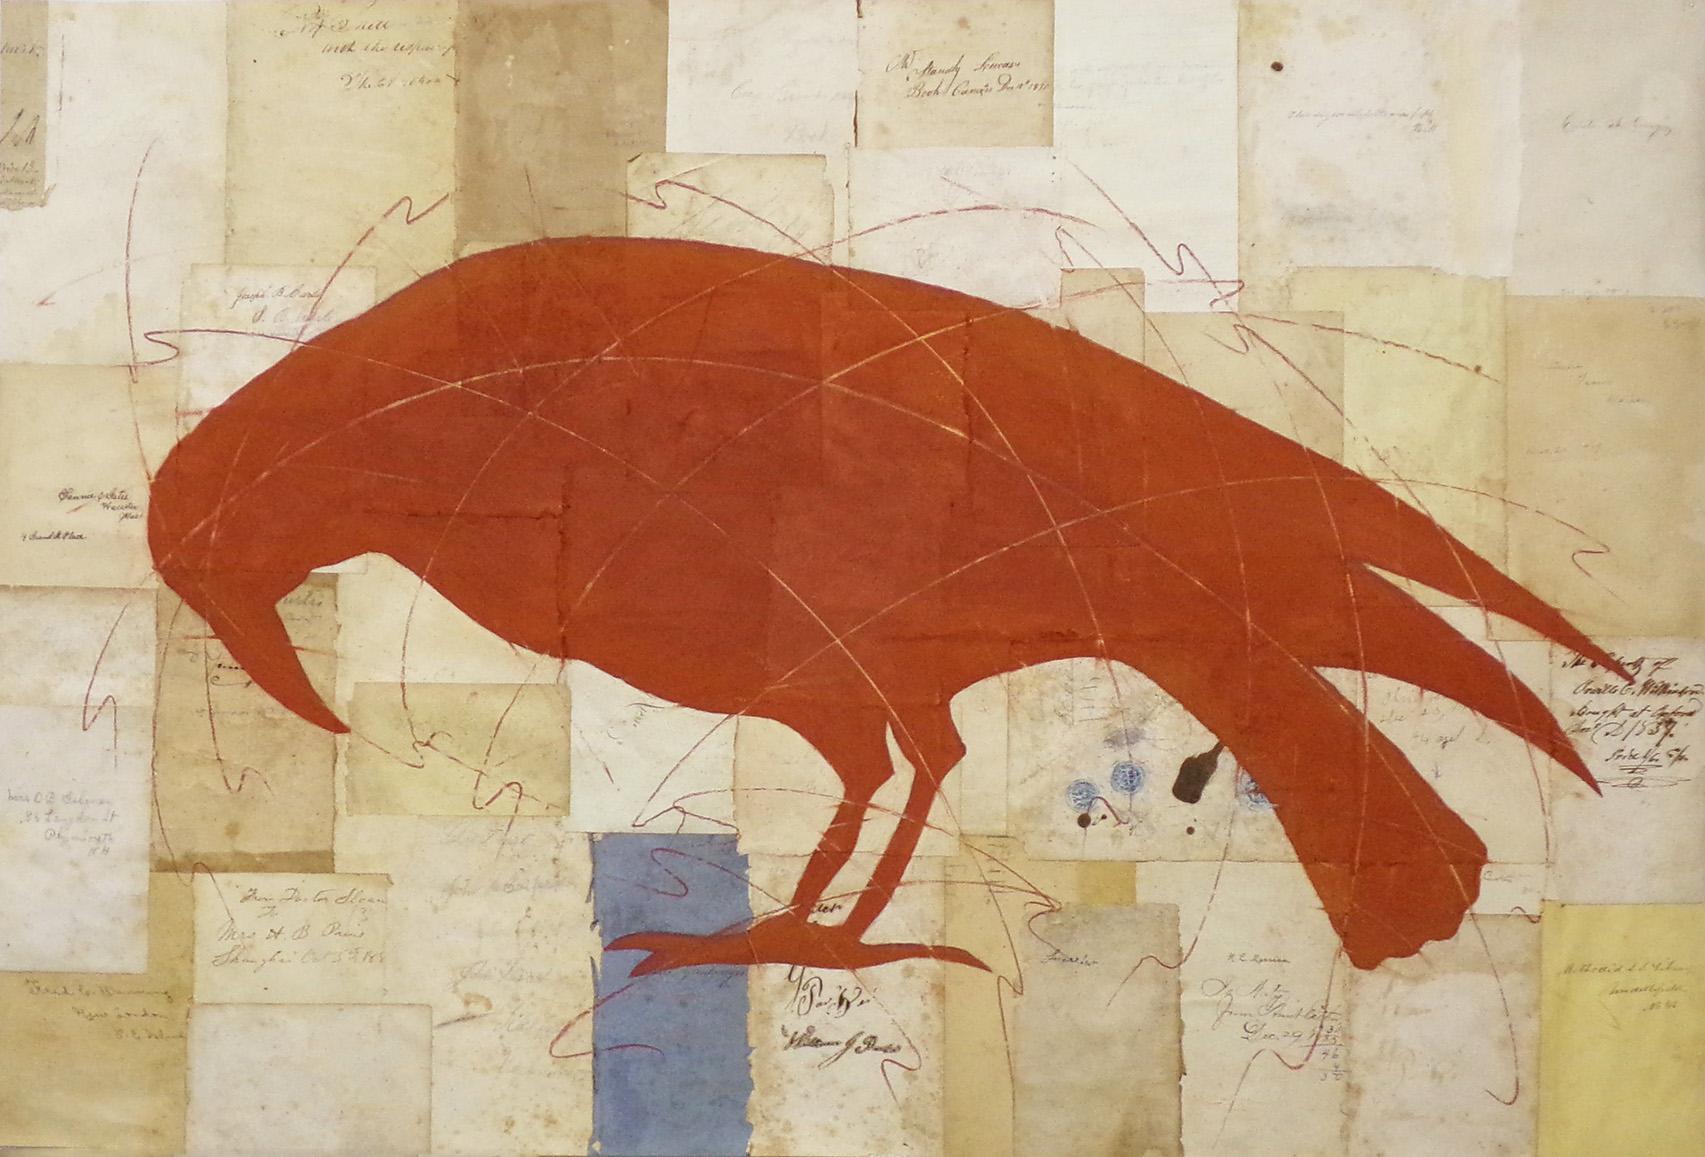 Louise Laplante Animal Art - The Big Red Bird (Chalk drawing of single bird on vintage collaged book pages)